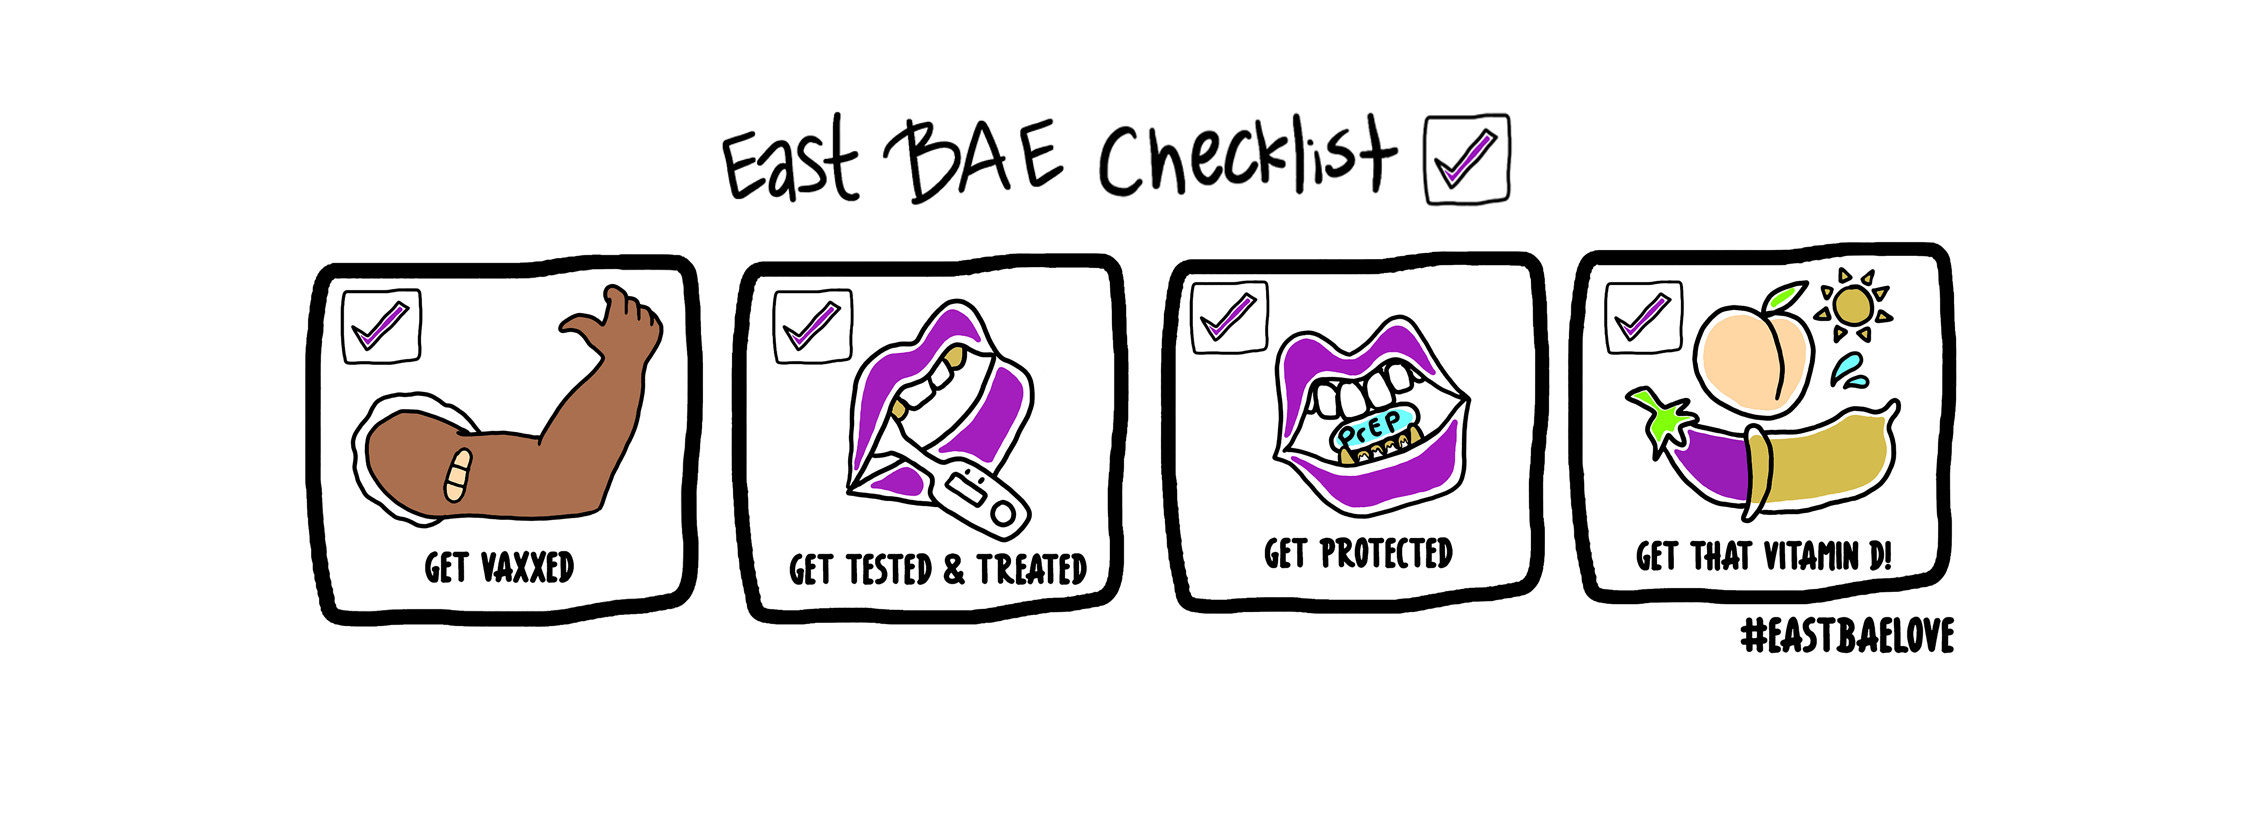 East Bae checklist: get vaccinated, get tested and treated, get protected, and get Vitamin D.